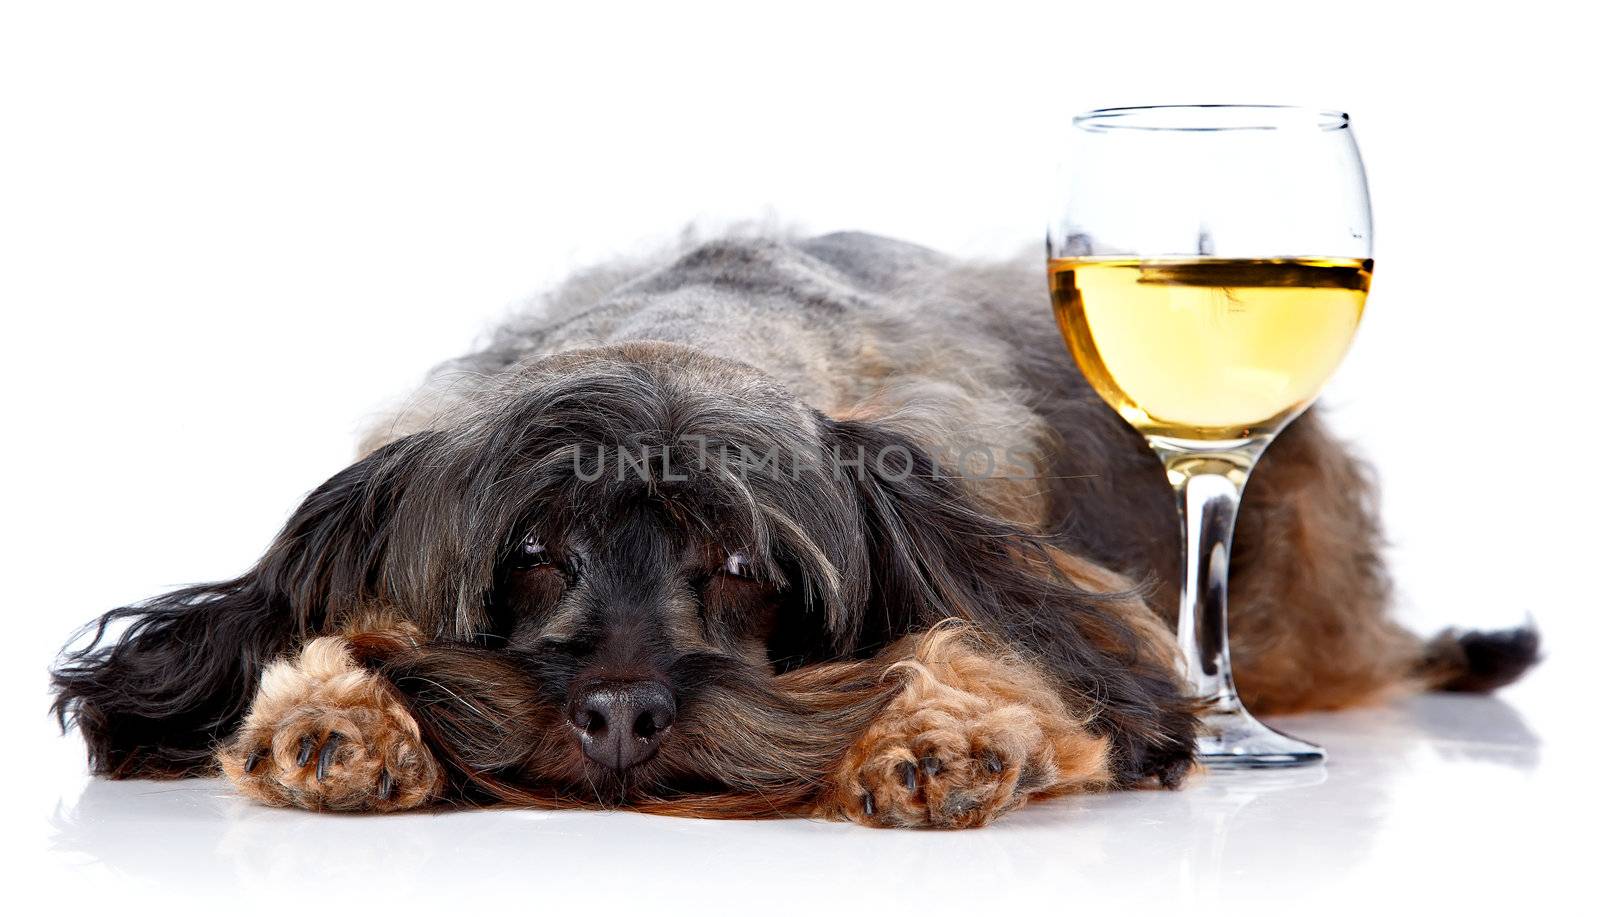 Dog with a wine glass. Small doggie. Decorative thoroughbred dog. Puppy of the Petersburg orchid. Shaggy doggie.